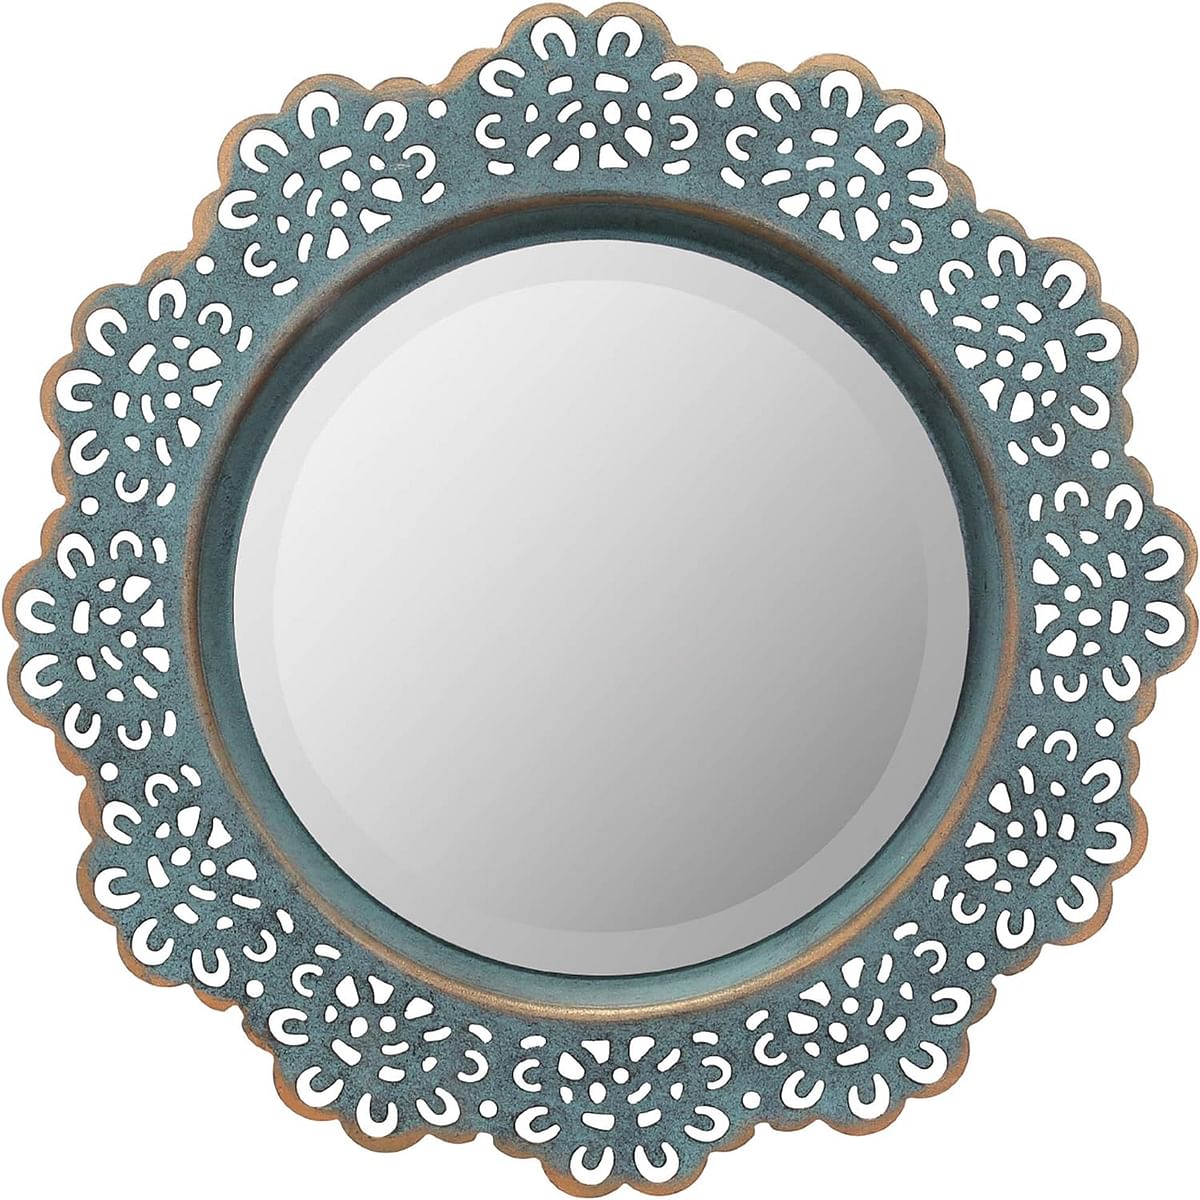 Stonebriar Decorative Round Metal Lace Wall Mirror, 12.5 Inch, Turquoise